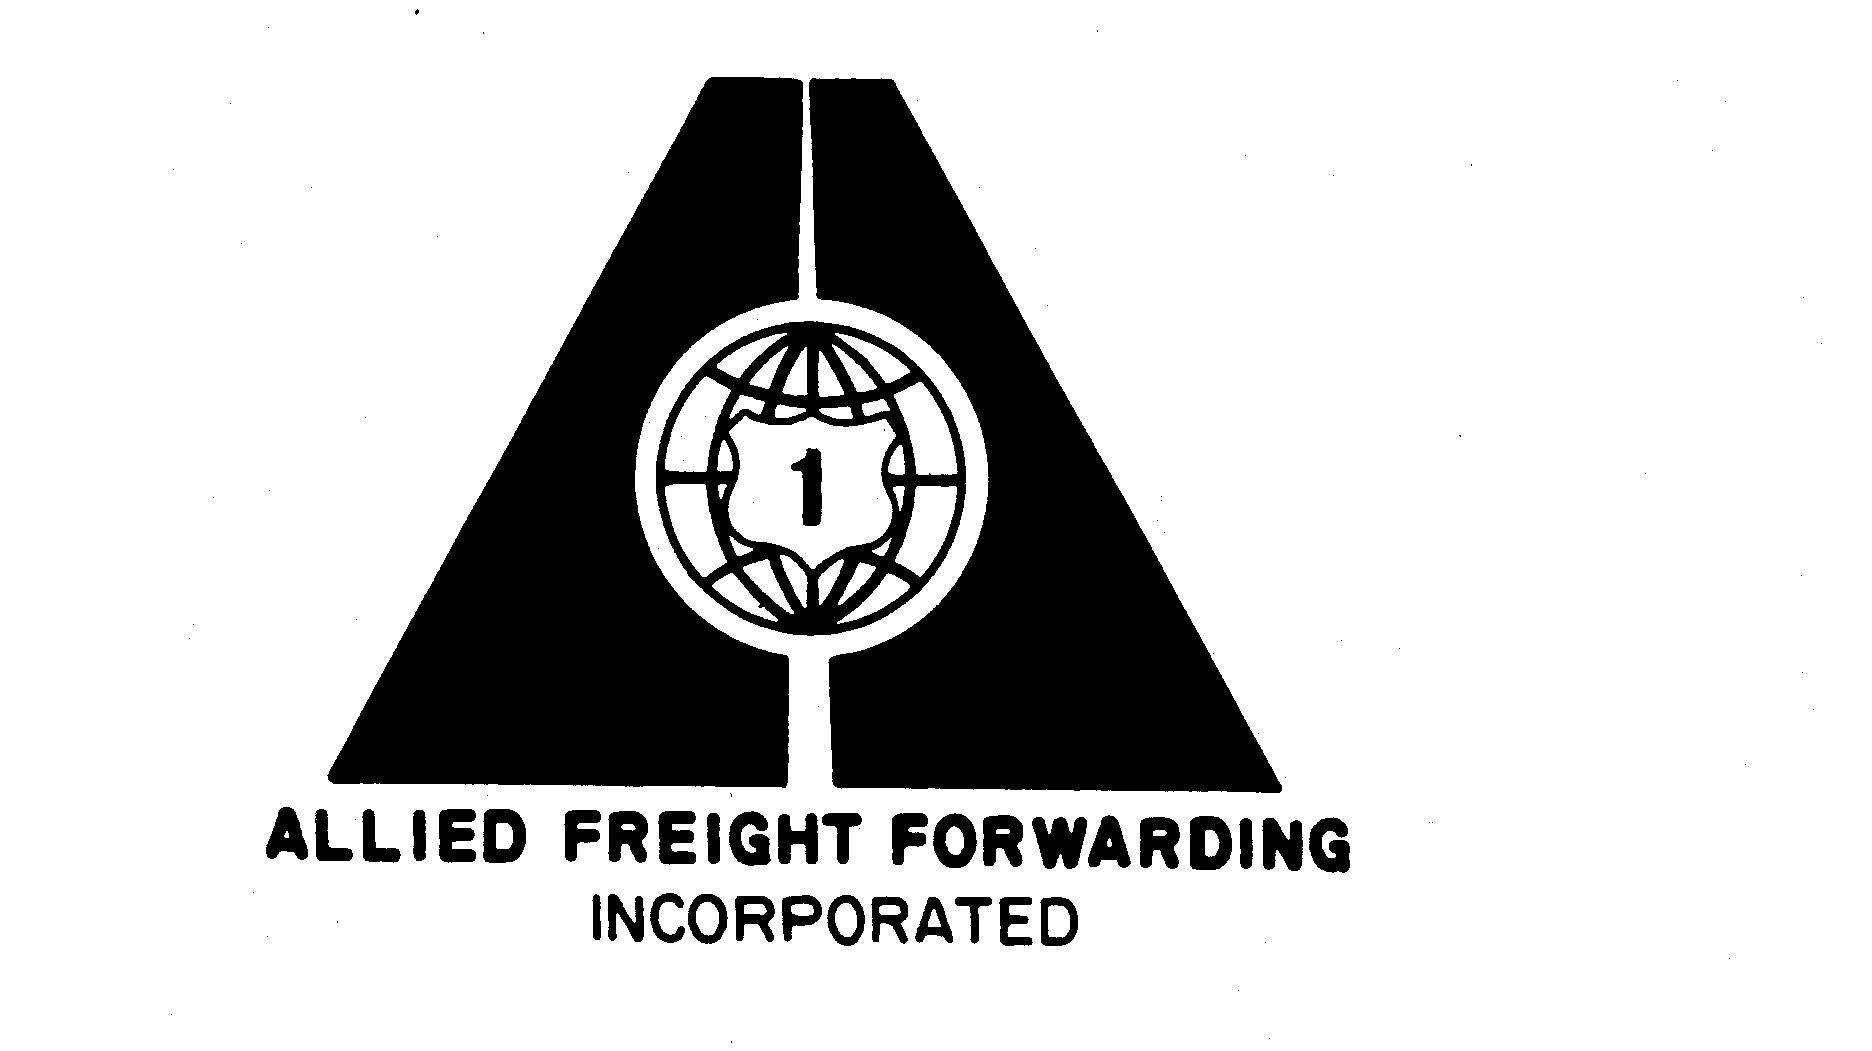 Trademark Logo A ALLIED FREIGHT FORWARDING INCORPORATED I